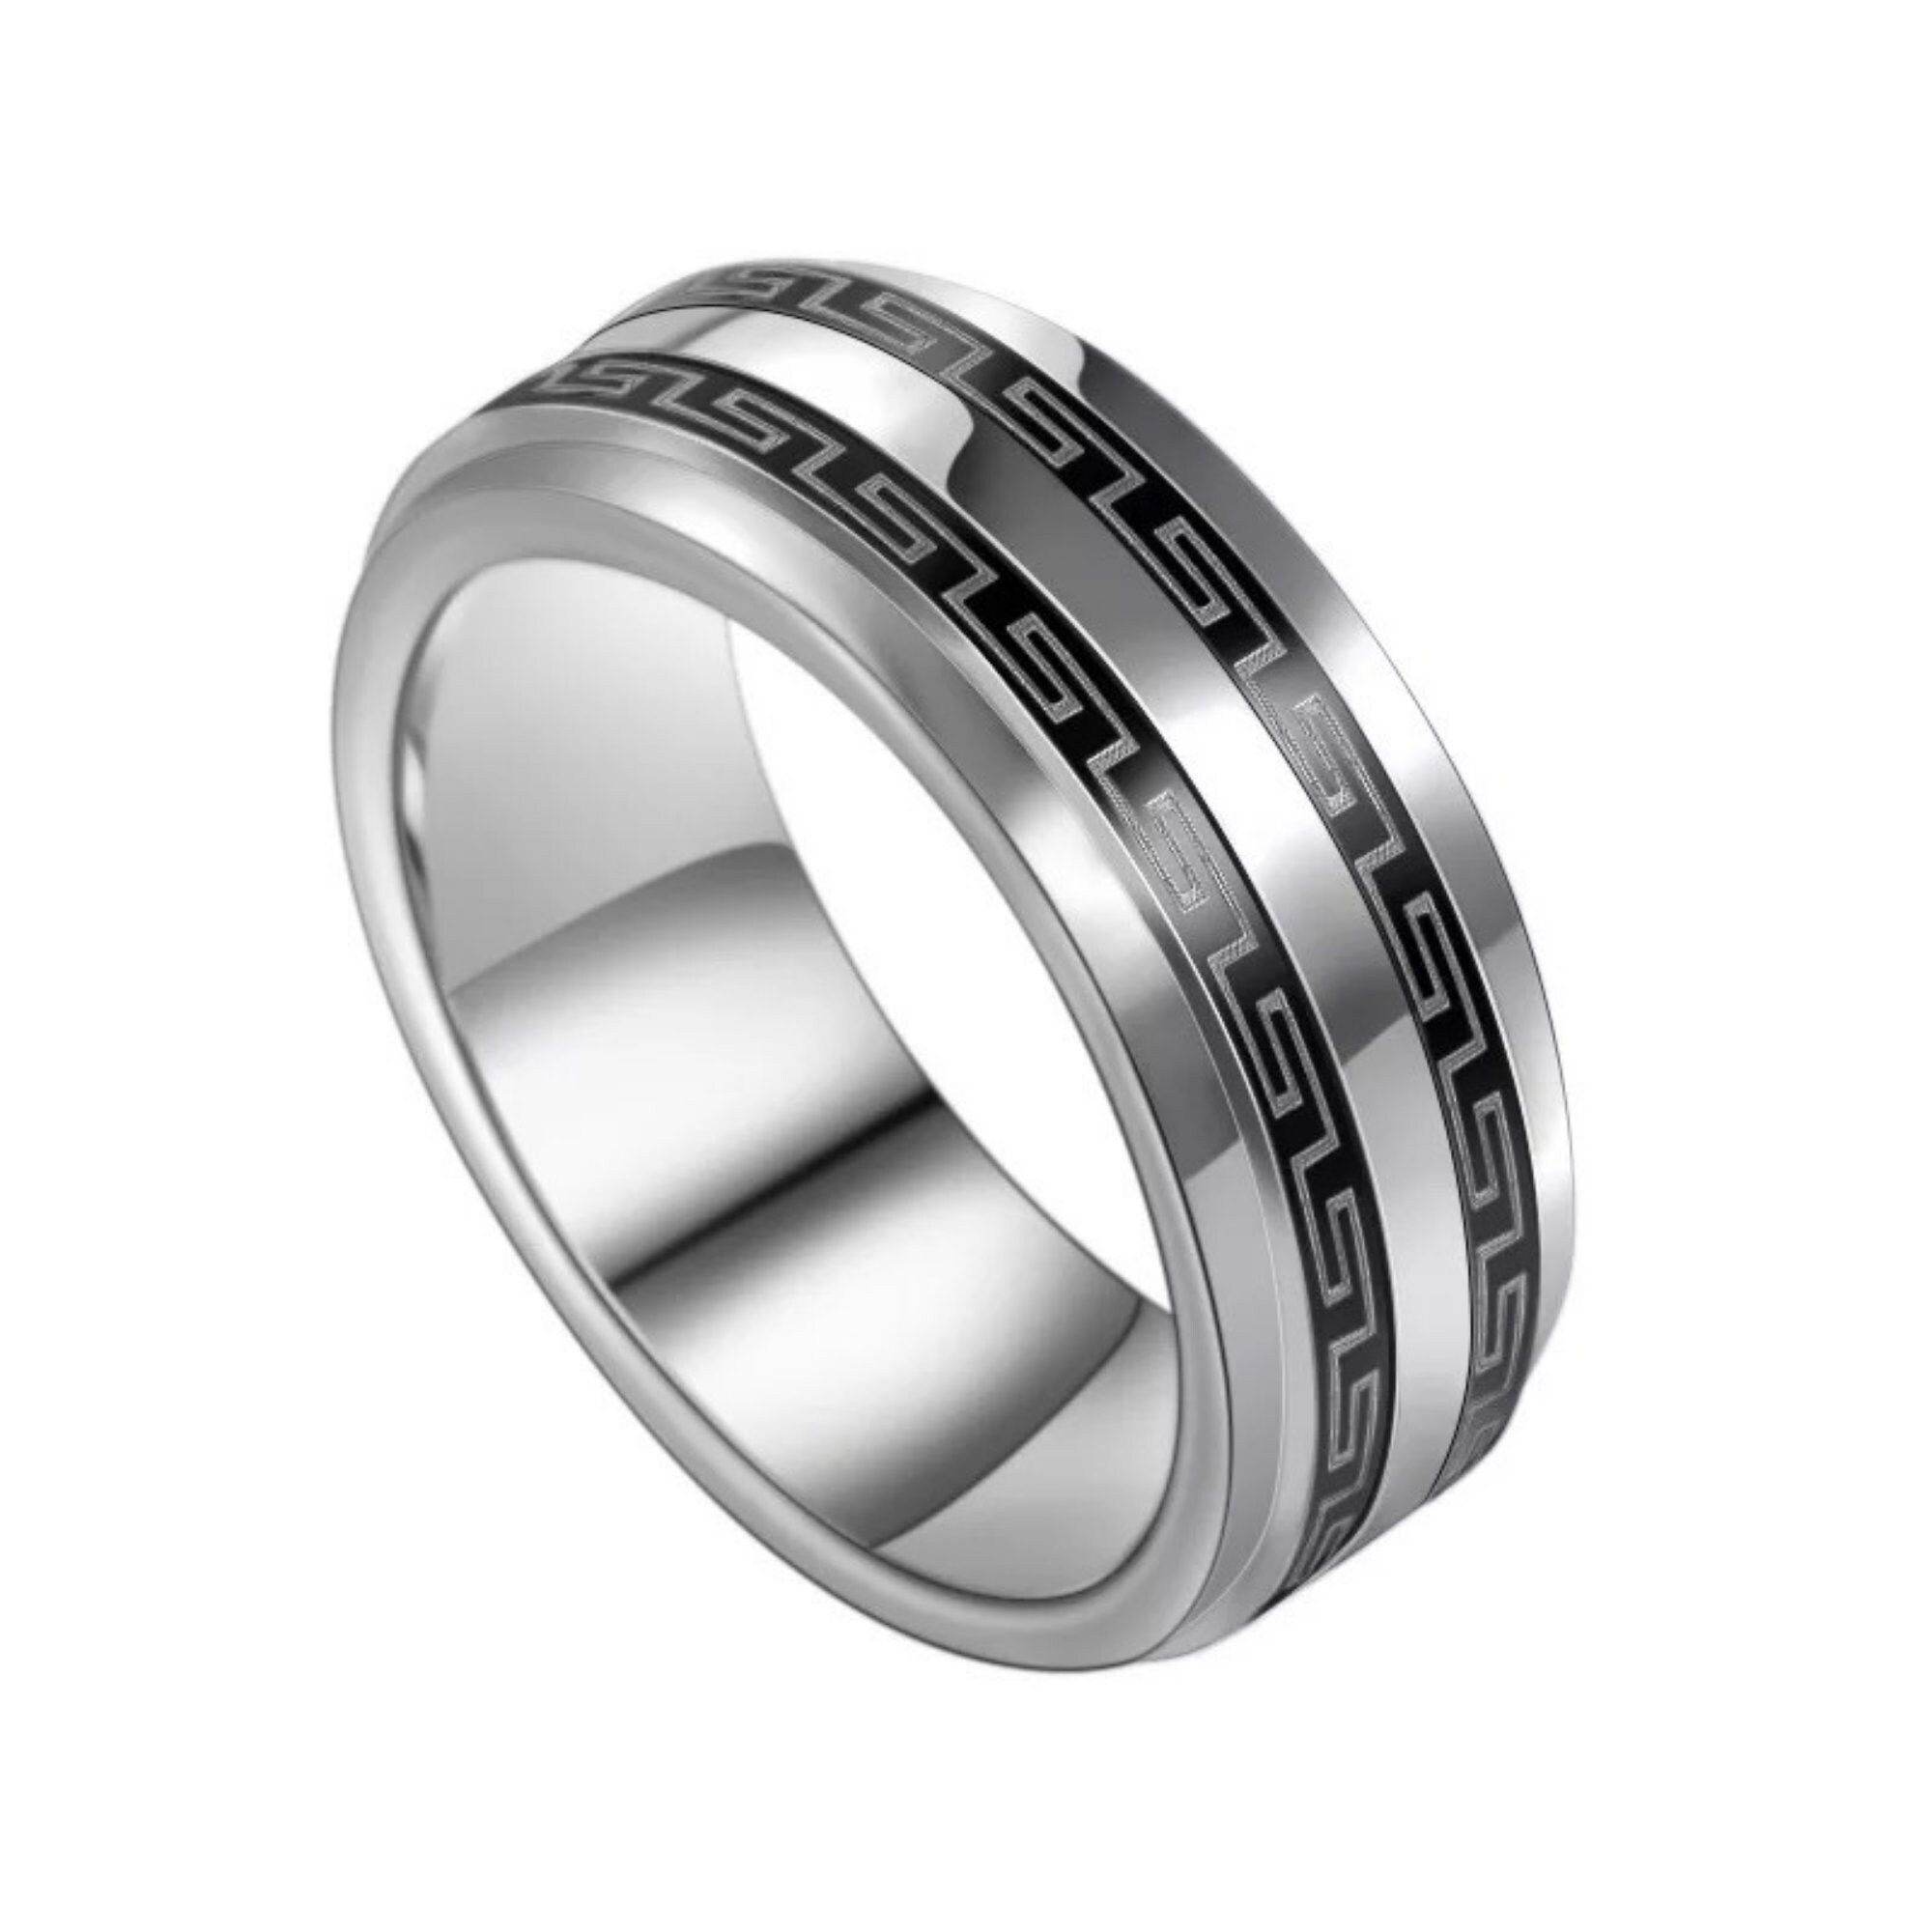 Details about   Satin Black Wedding Band Mens Womens Stainless Steel 6mm Simple Gothic Ring 5-13 